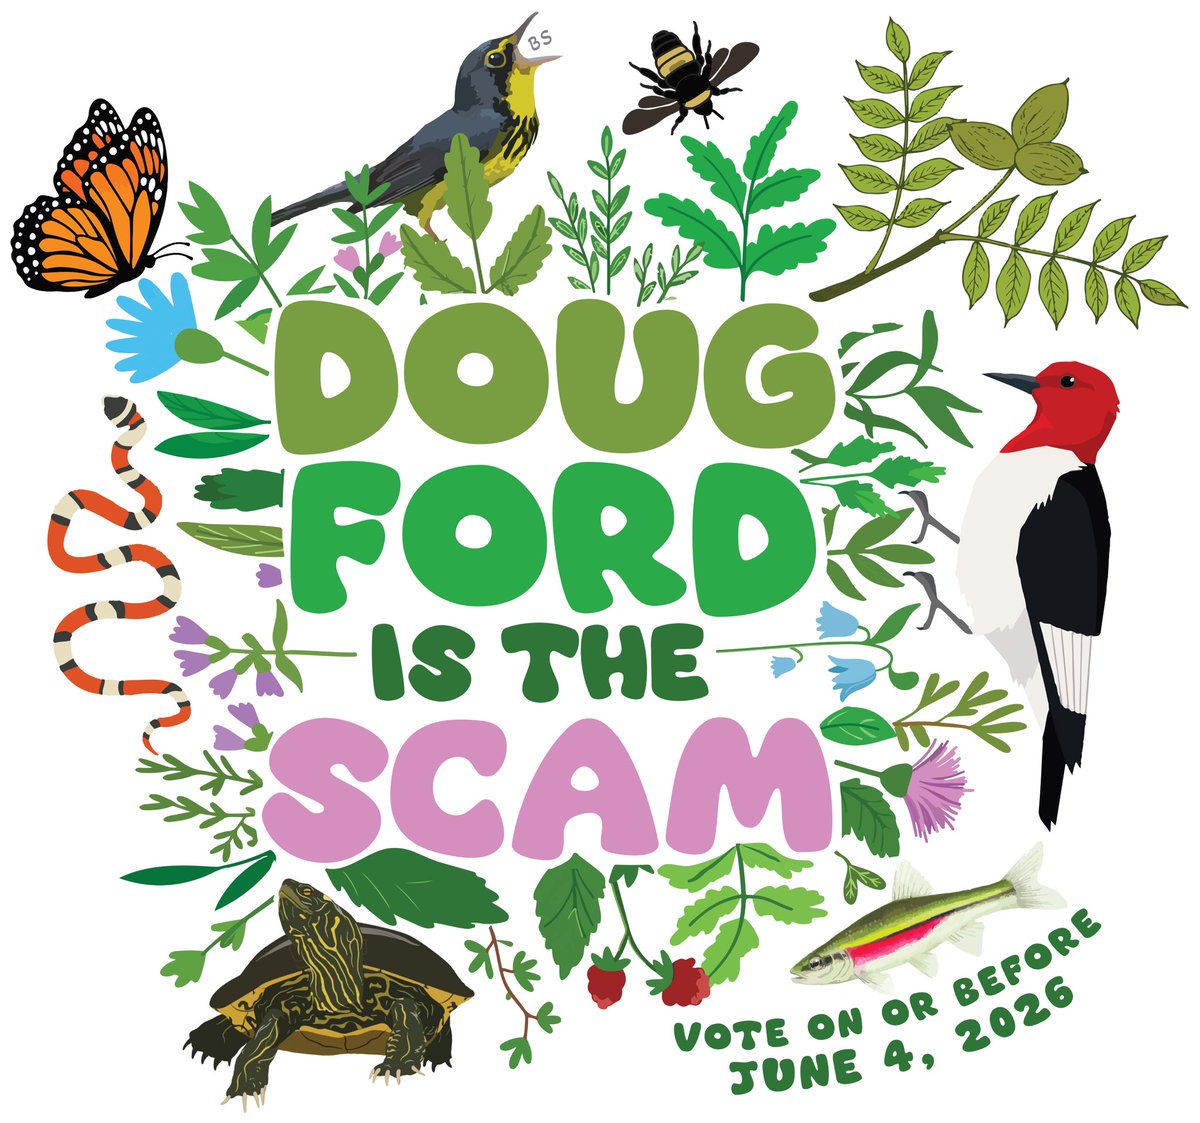 Happy #EndangeredSpeciesDay! By popular demand, I put this design up so folks can print it on clothing, stickers, etc. A play on a recent quote by Ontario’s Premier describing the #Greenbelt as “a scam”, it features several Species at Risk that live there
teepublic.com/t-shirt/454977…